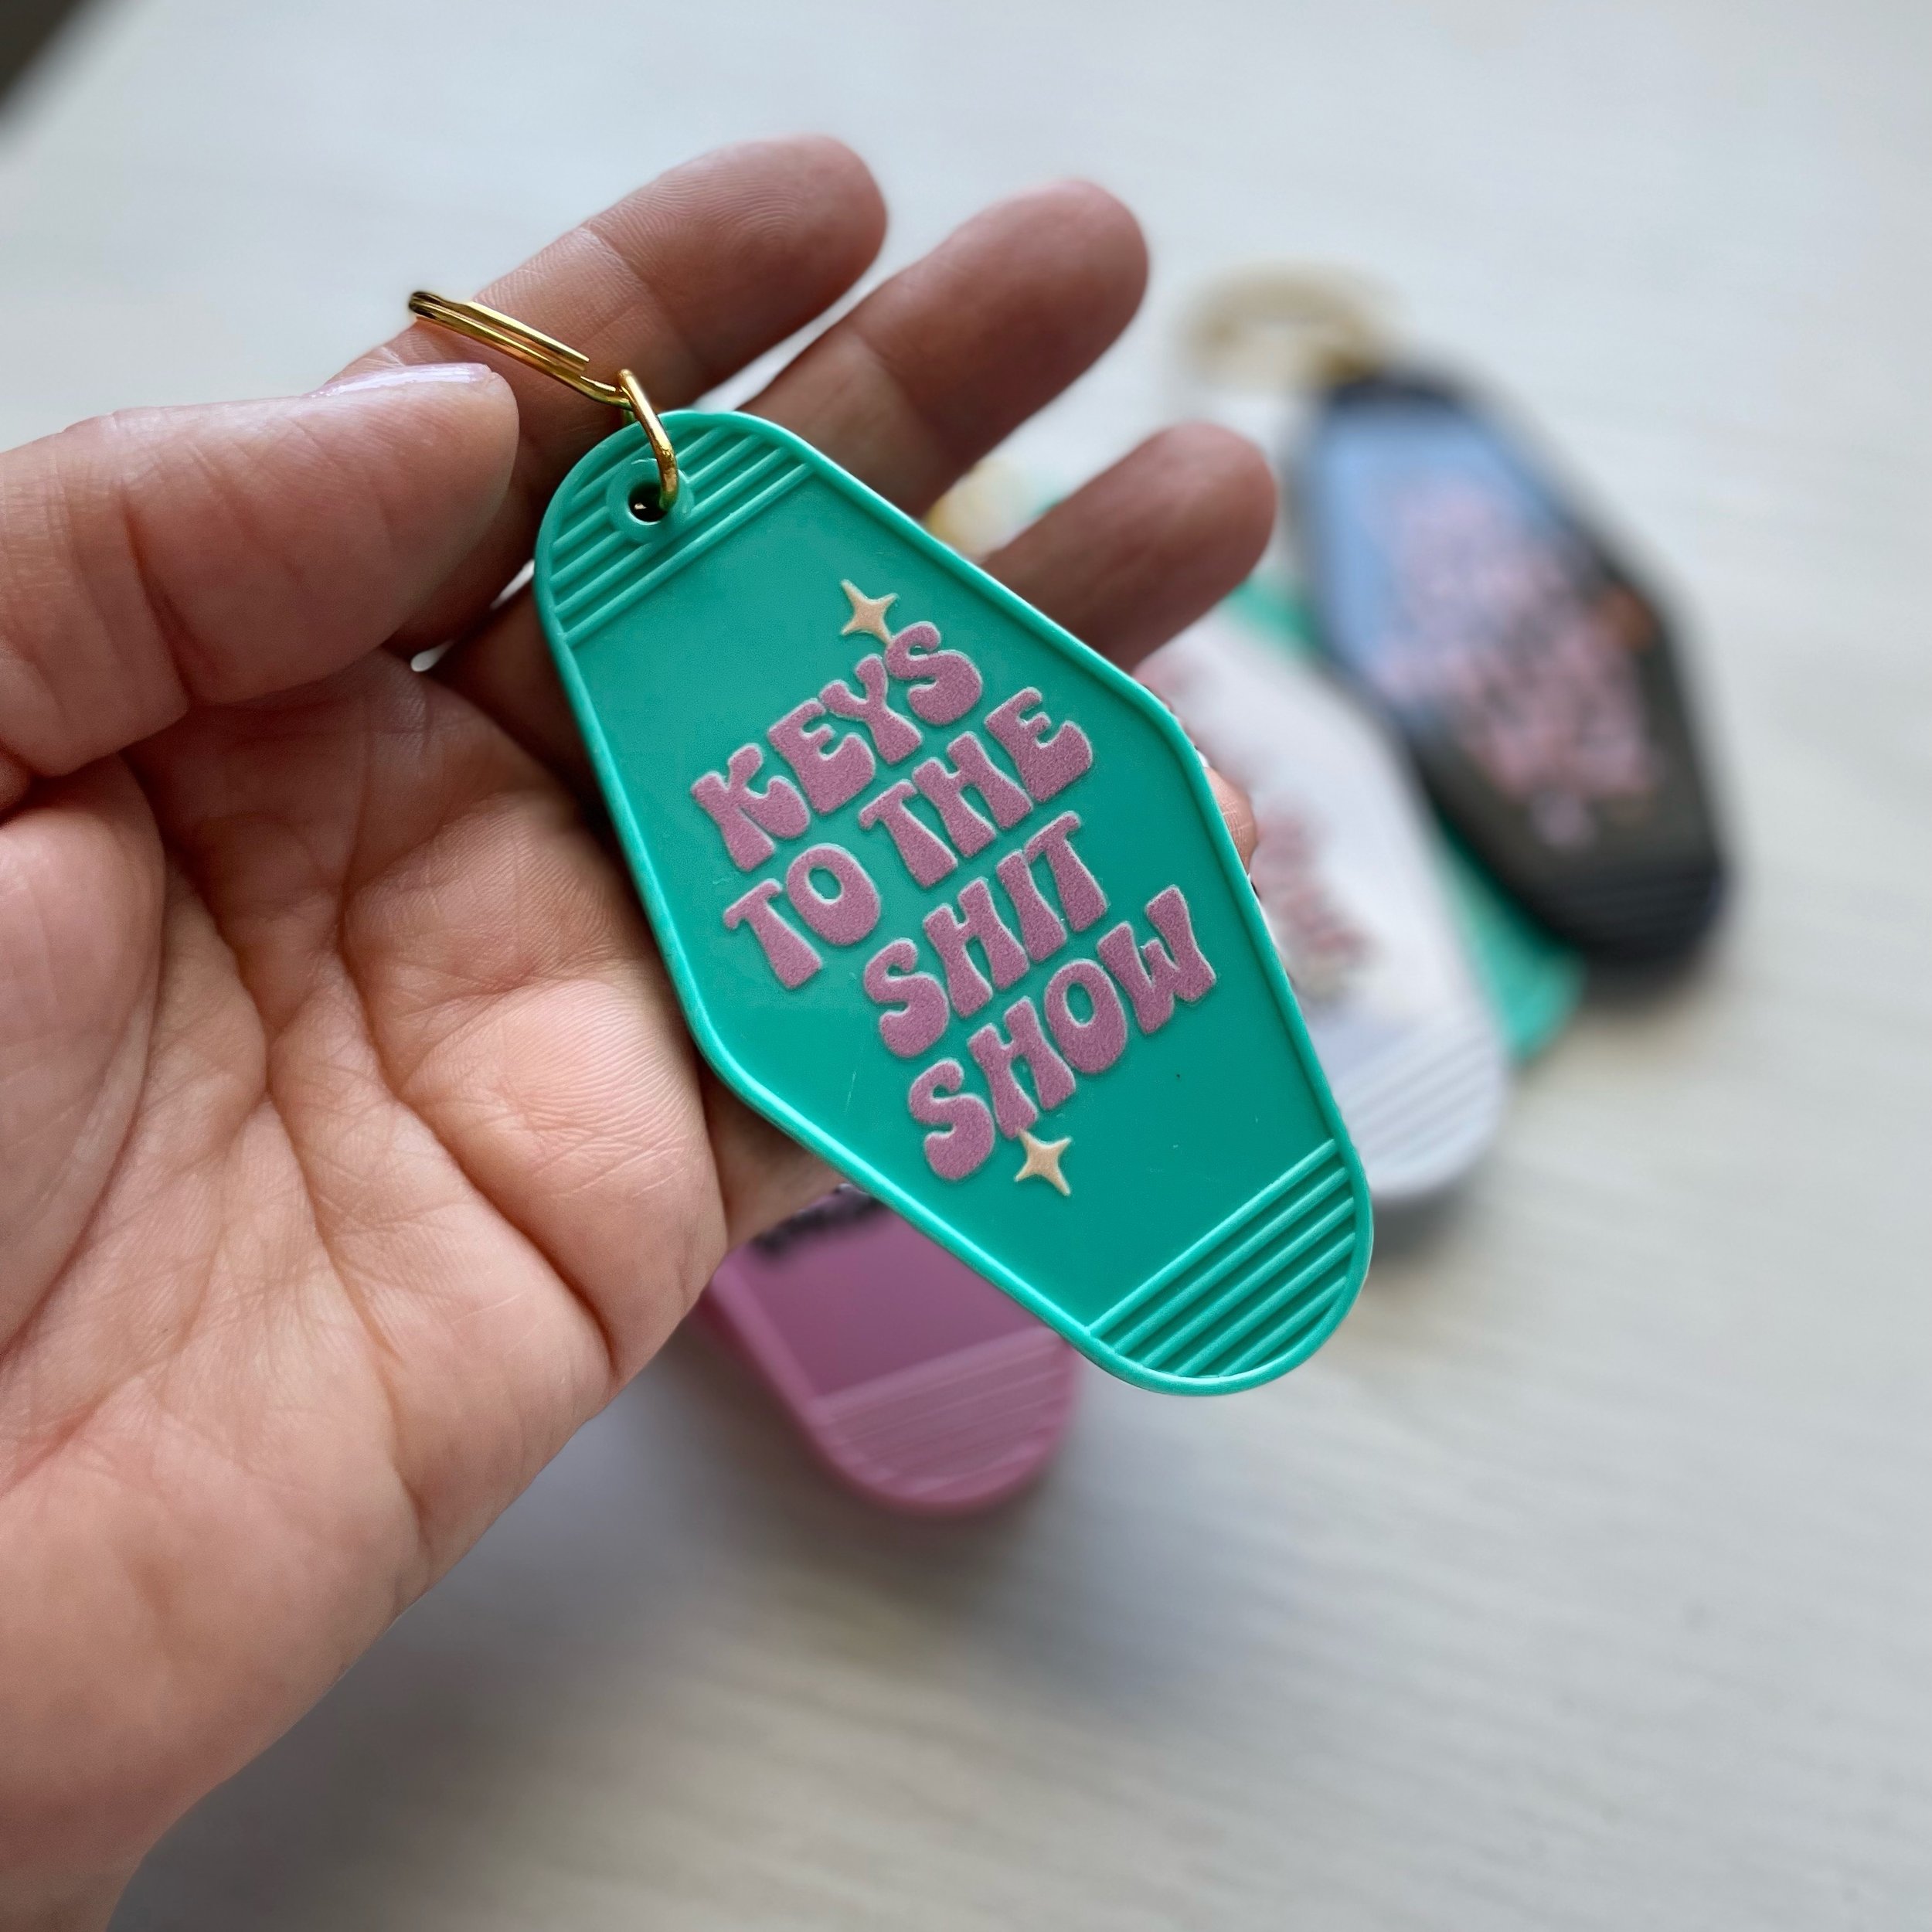 ✨Keys To The Shit Show✨. My current mood after school pick up! If you have kids or deal with craziness at work then you already know and you definitely need this keychain! 🙃 

Happy Friday! 

All of our keychains are $6. These make great gifts! 😉 
